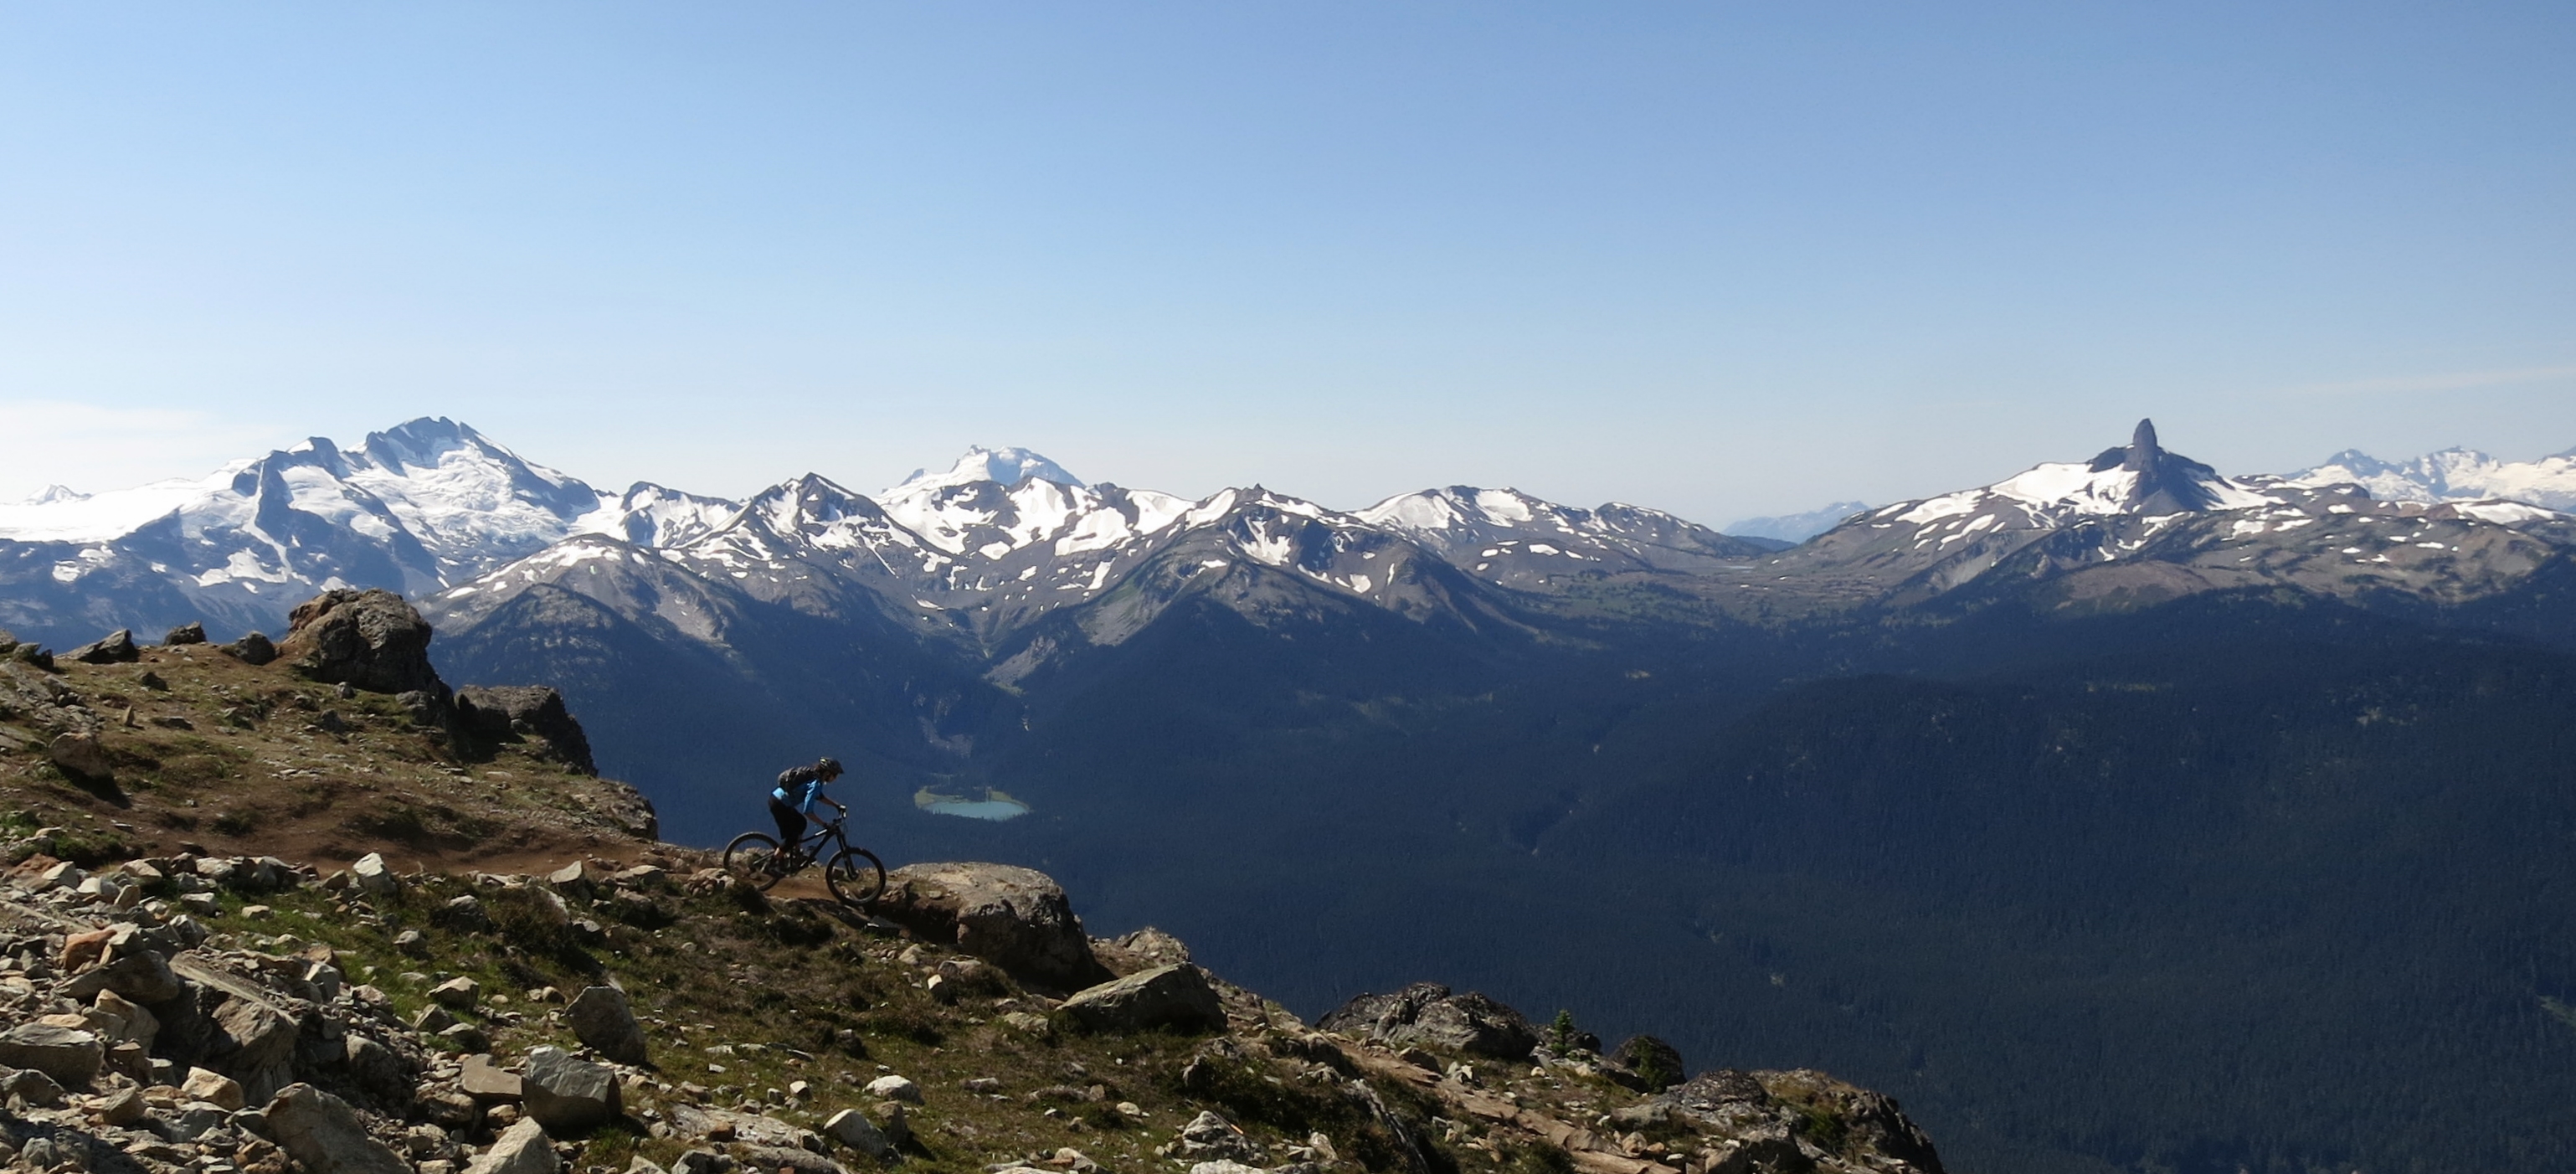 A guide to navigating the Whistler Valley Trail